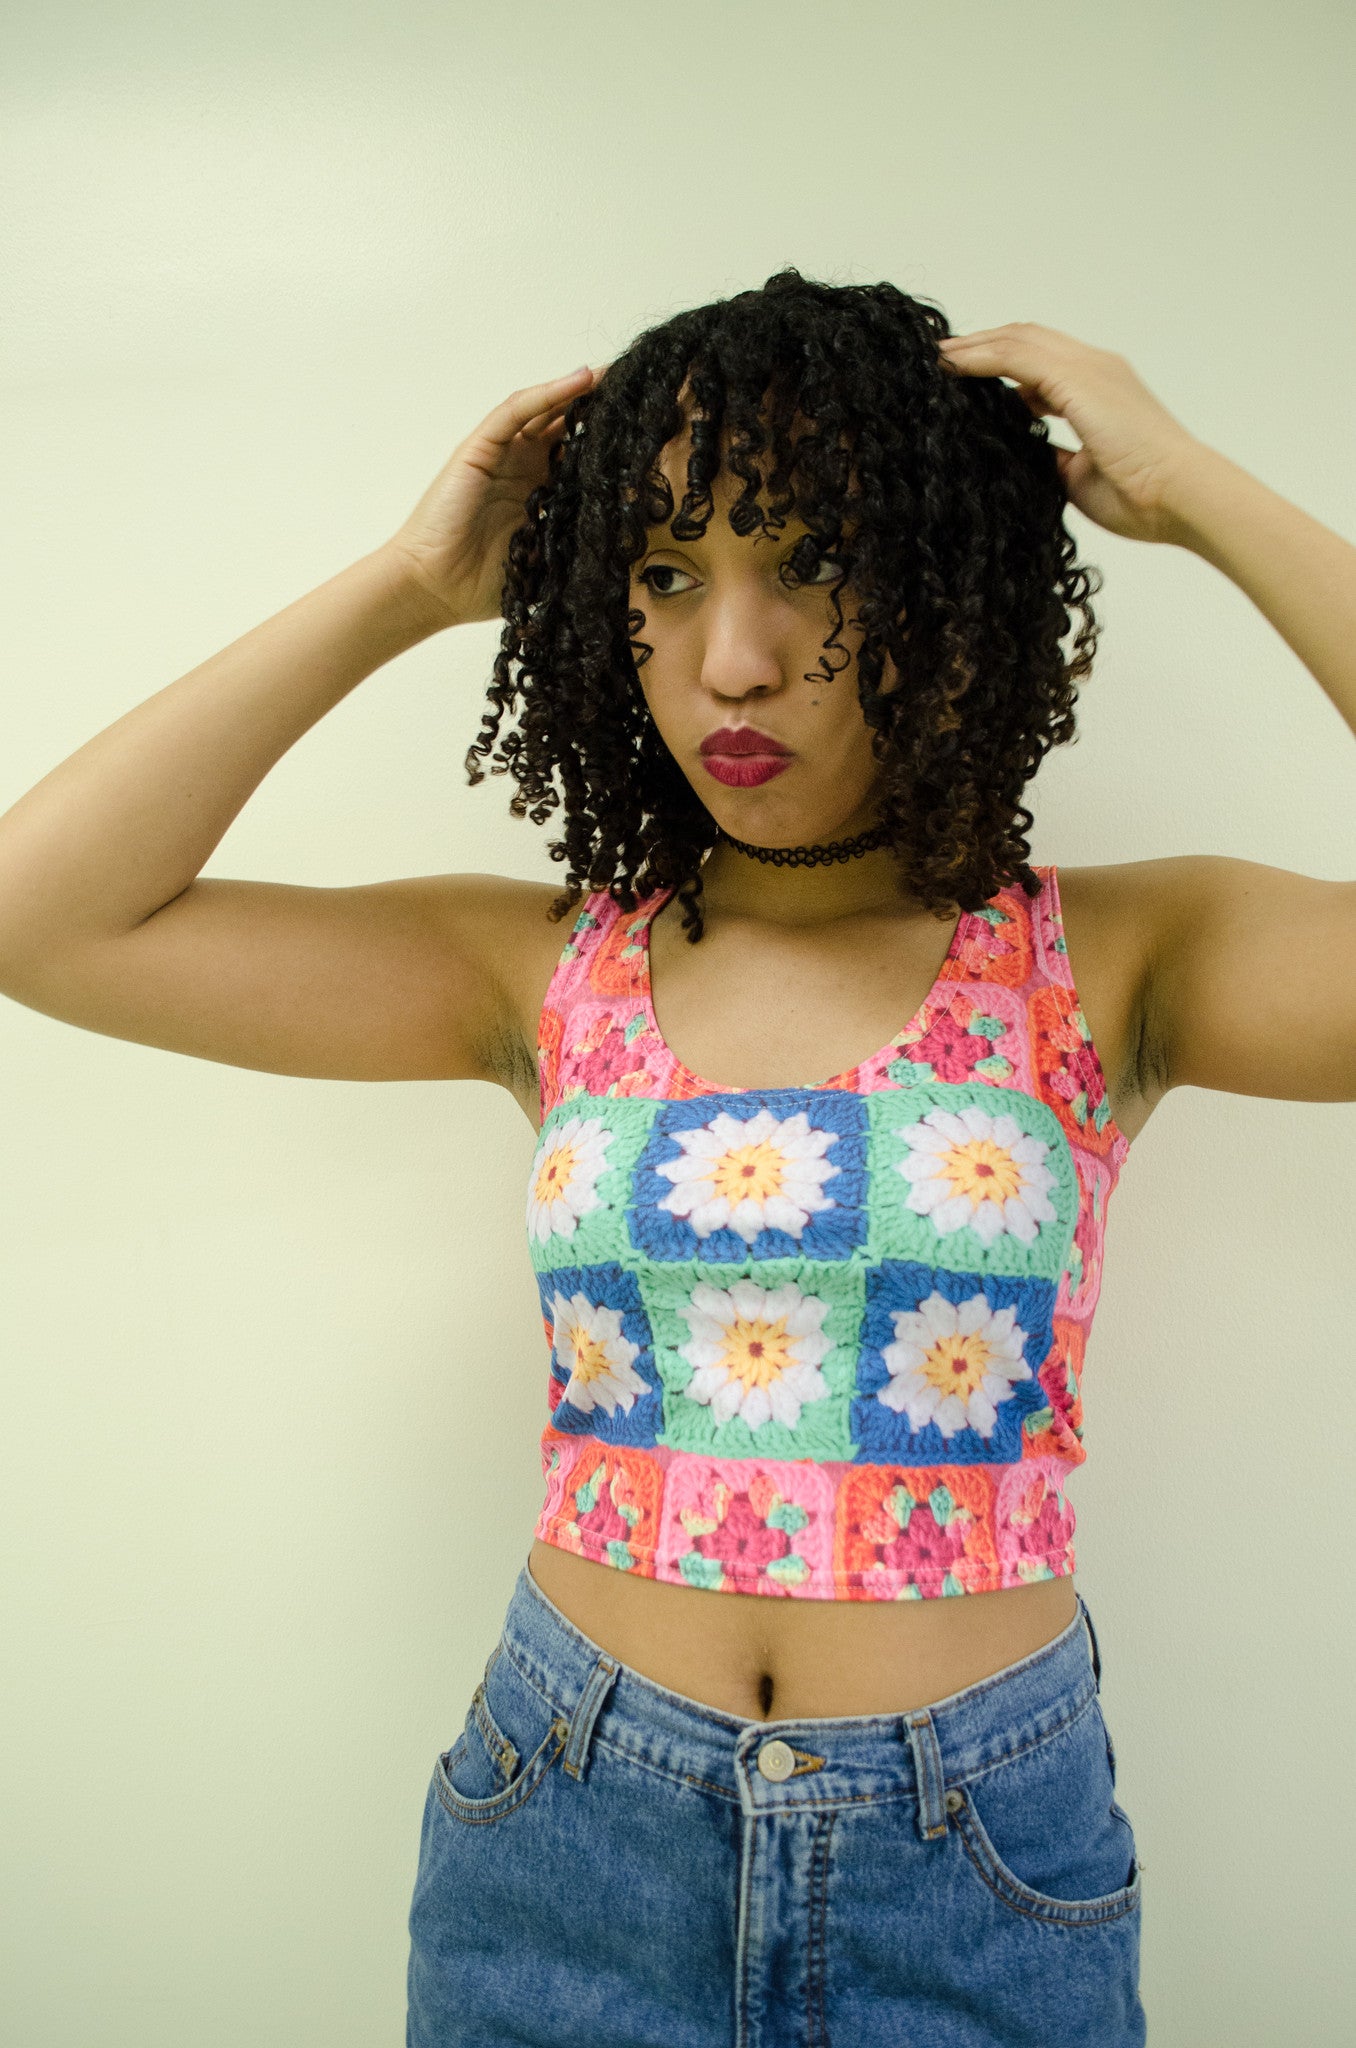 Snapdragon Brand Clothing Granny Square Crochet Print neon crop top cropped sleeveless shirt in style Playa Daisy features a vintage psychedelic boho feel and a rainbow of colors. Made of comfortable spandex. Daisies